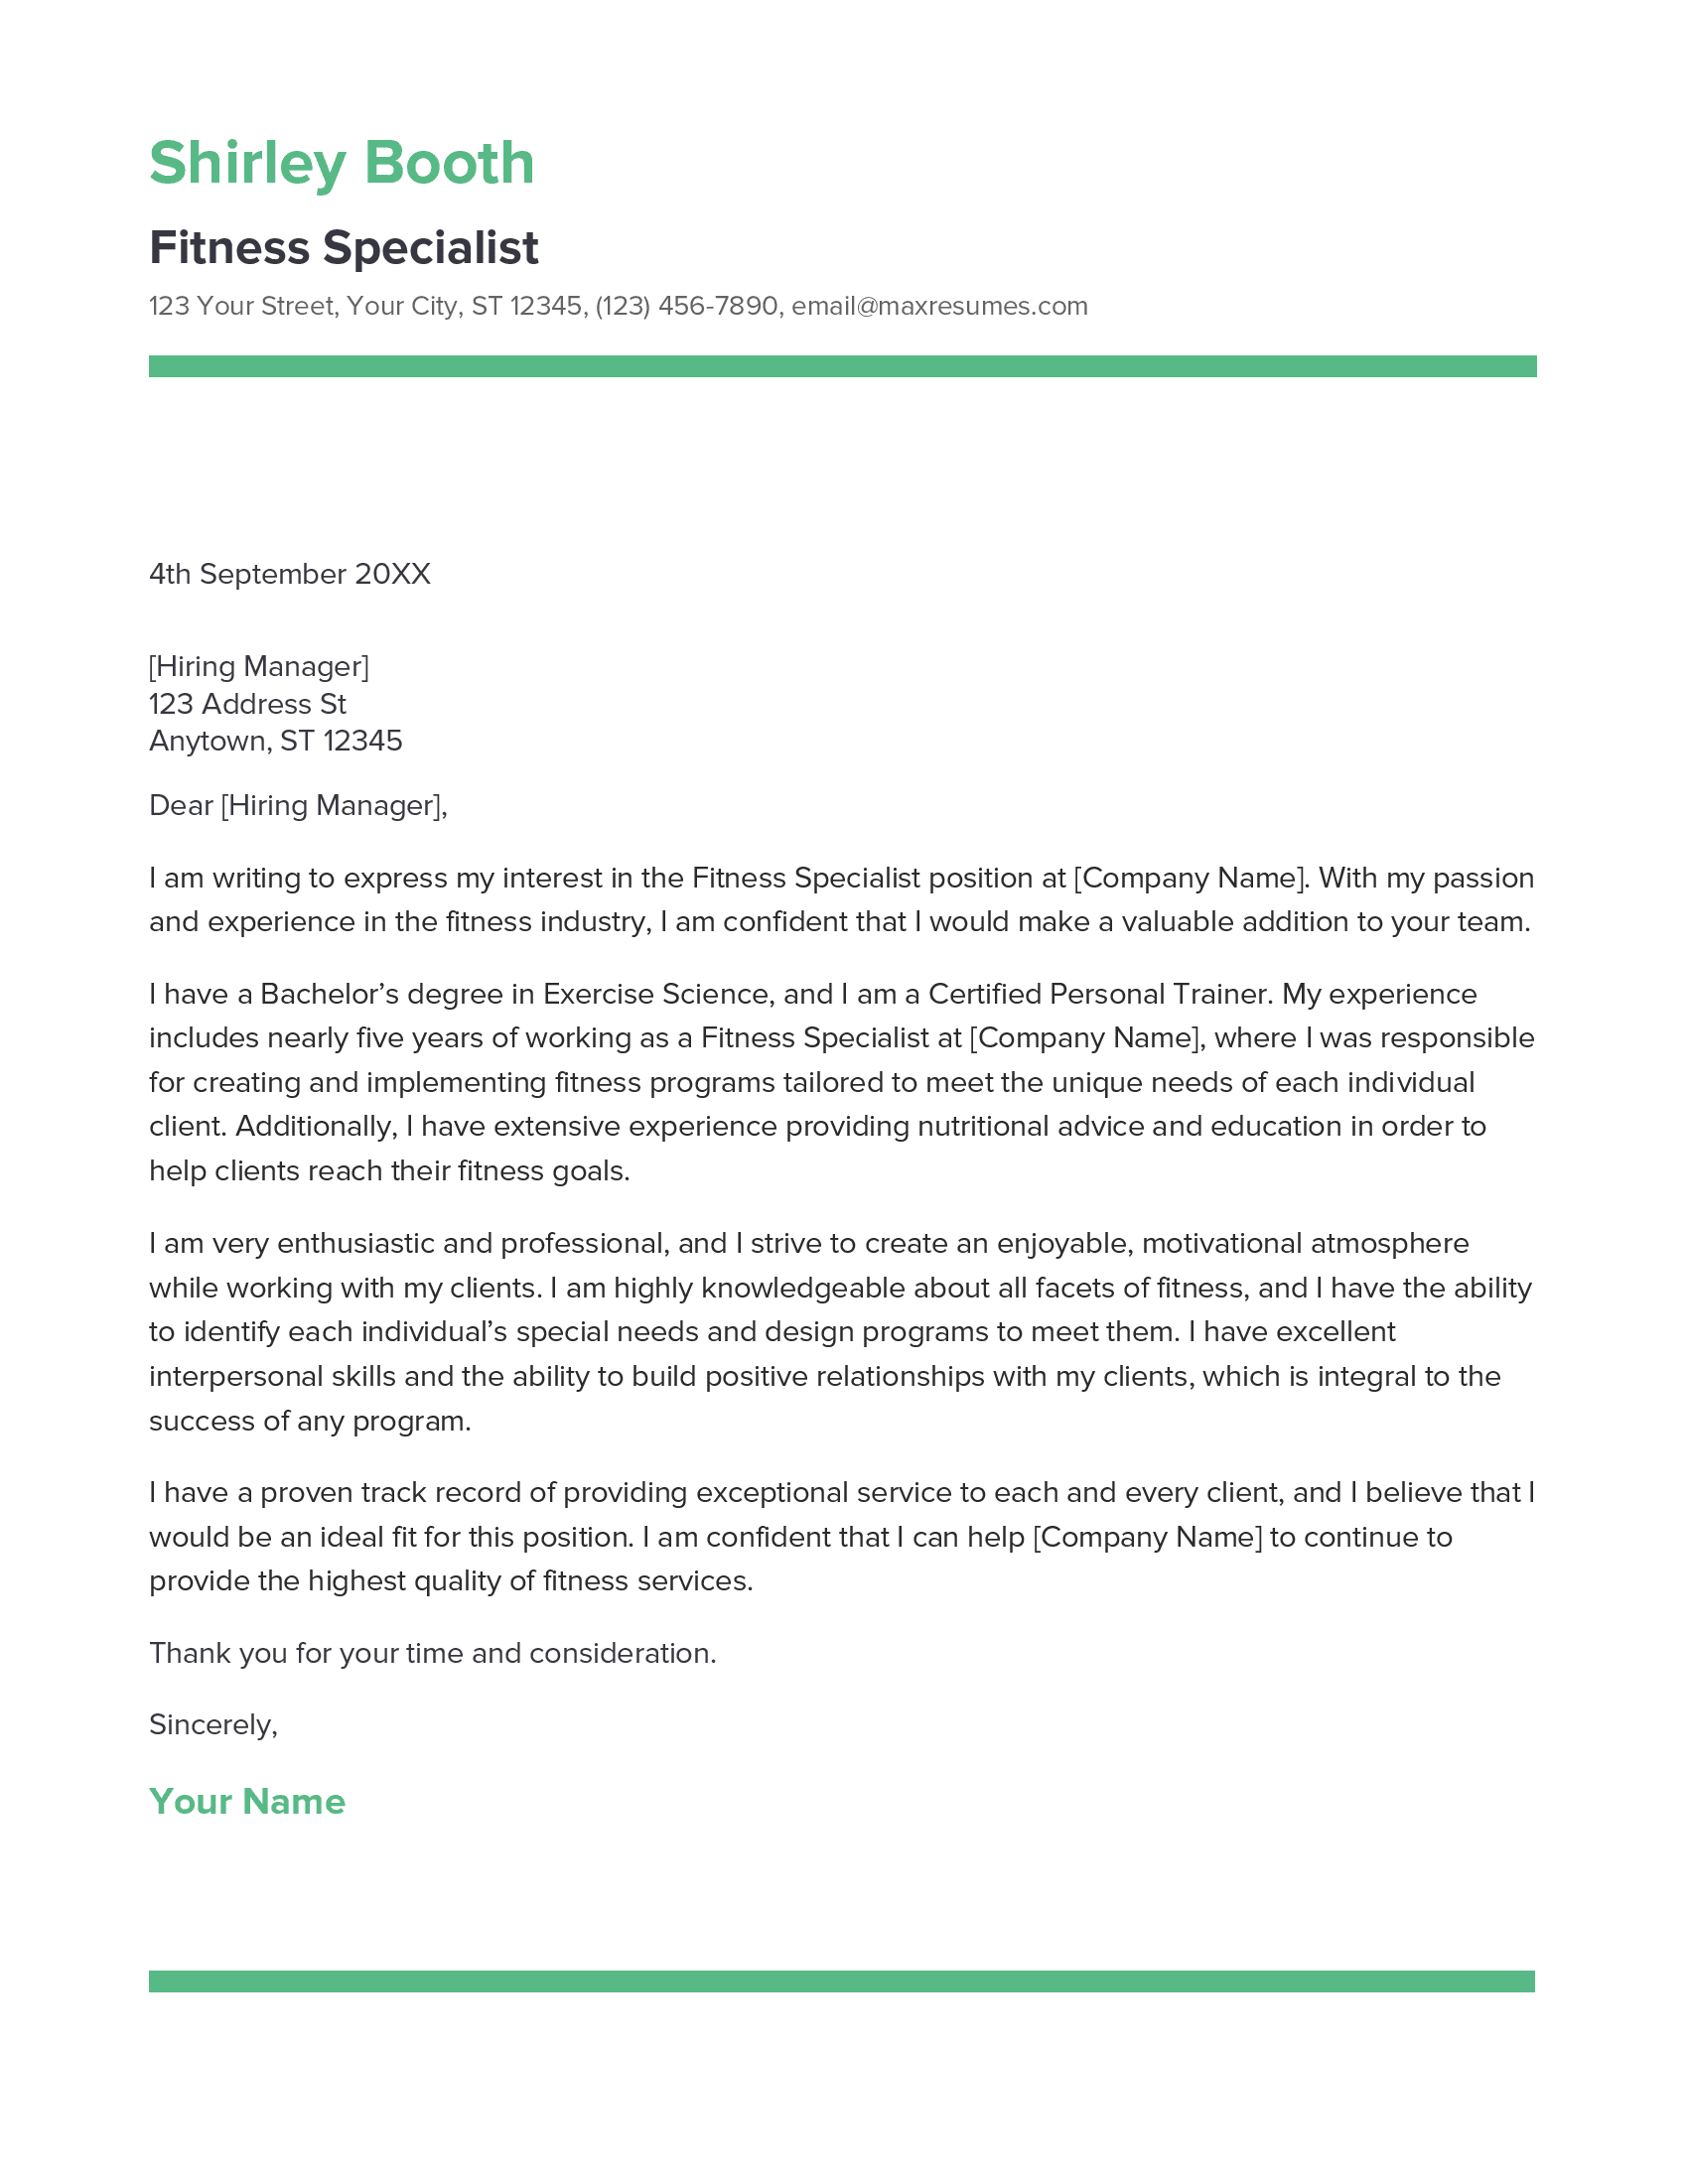 Fitness Specialist Cover Letter Example